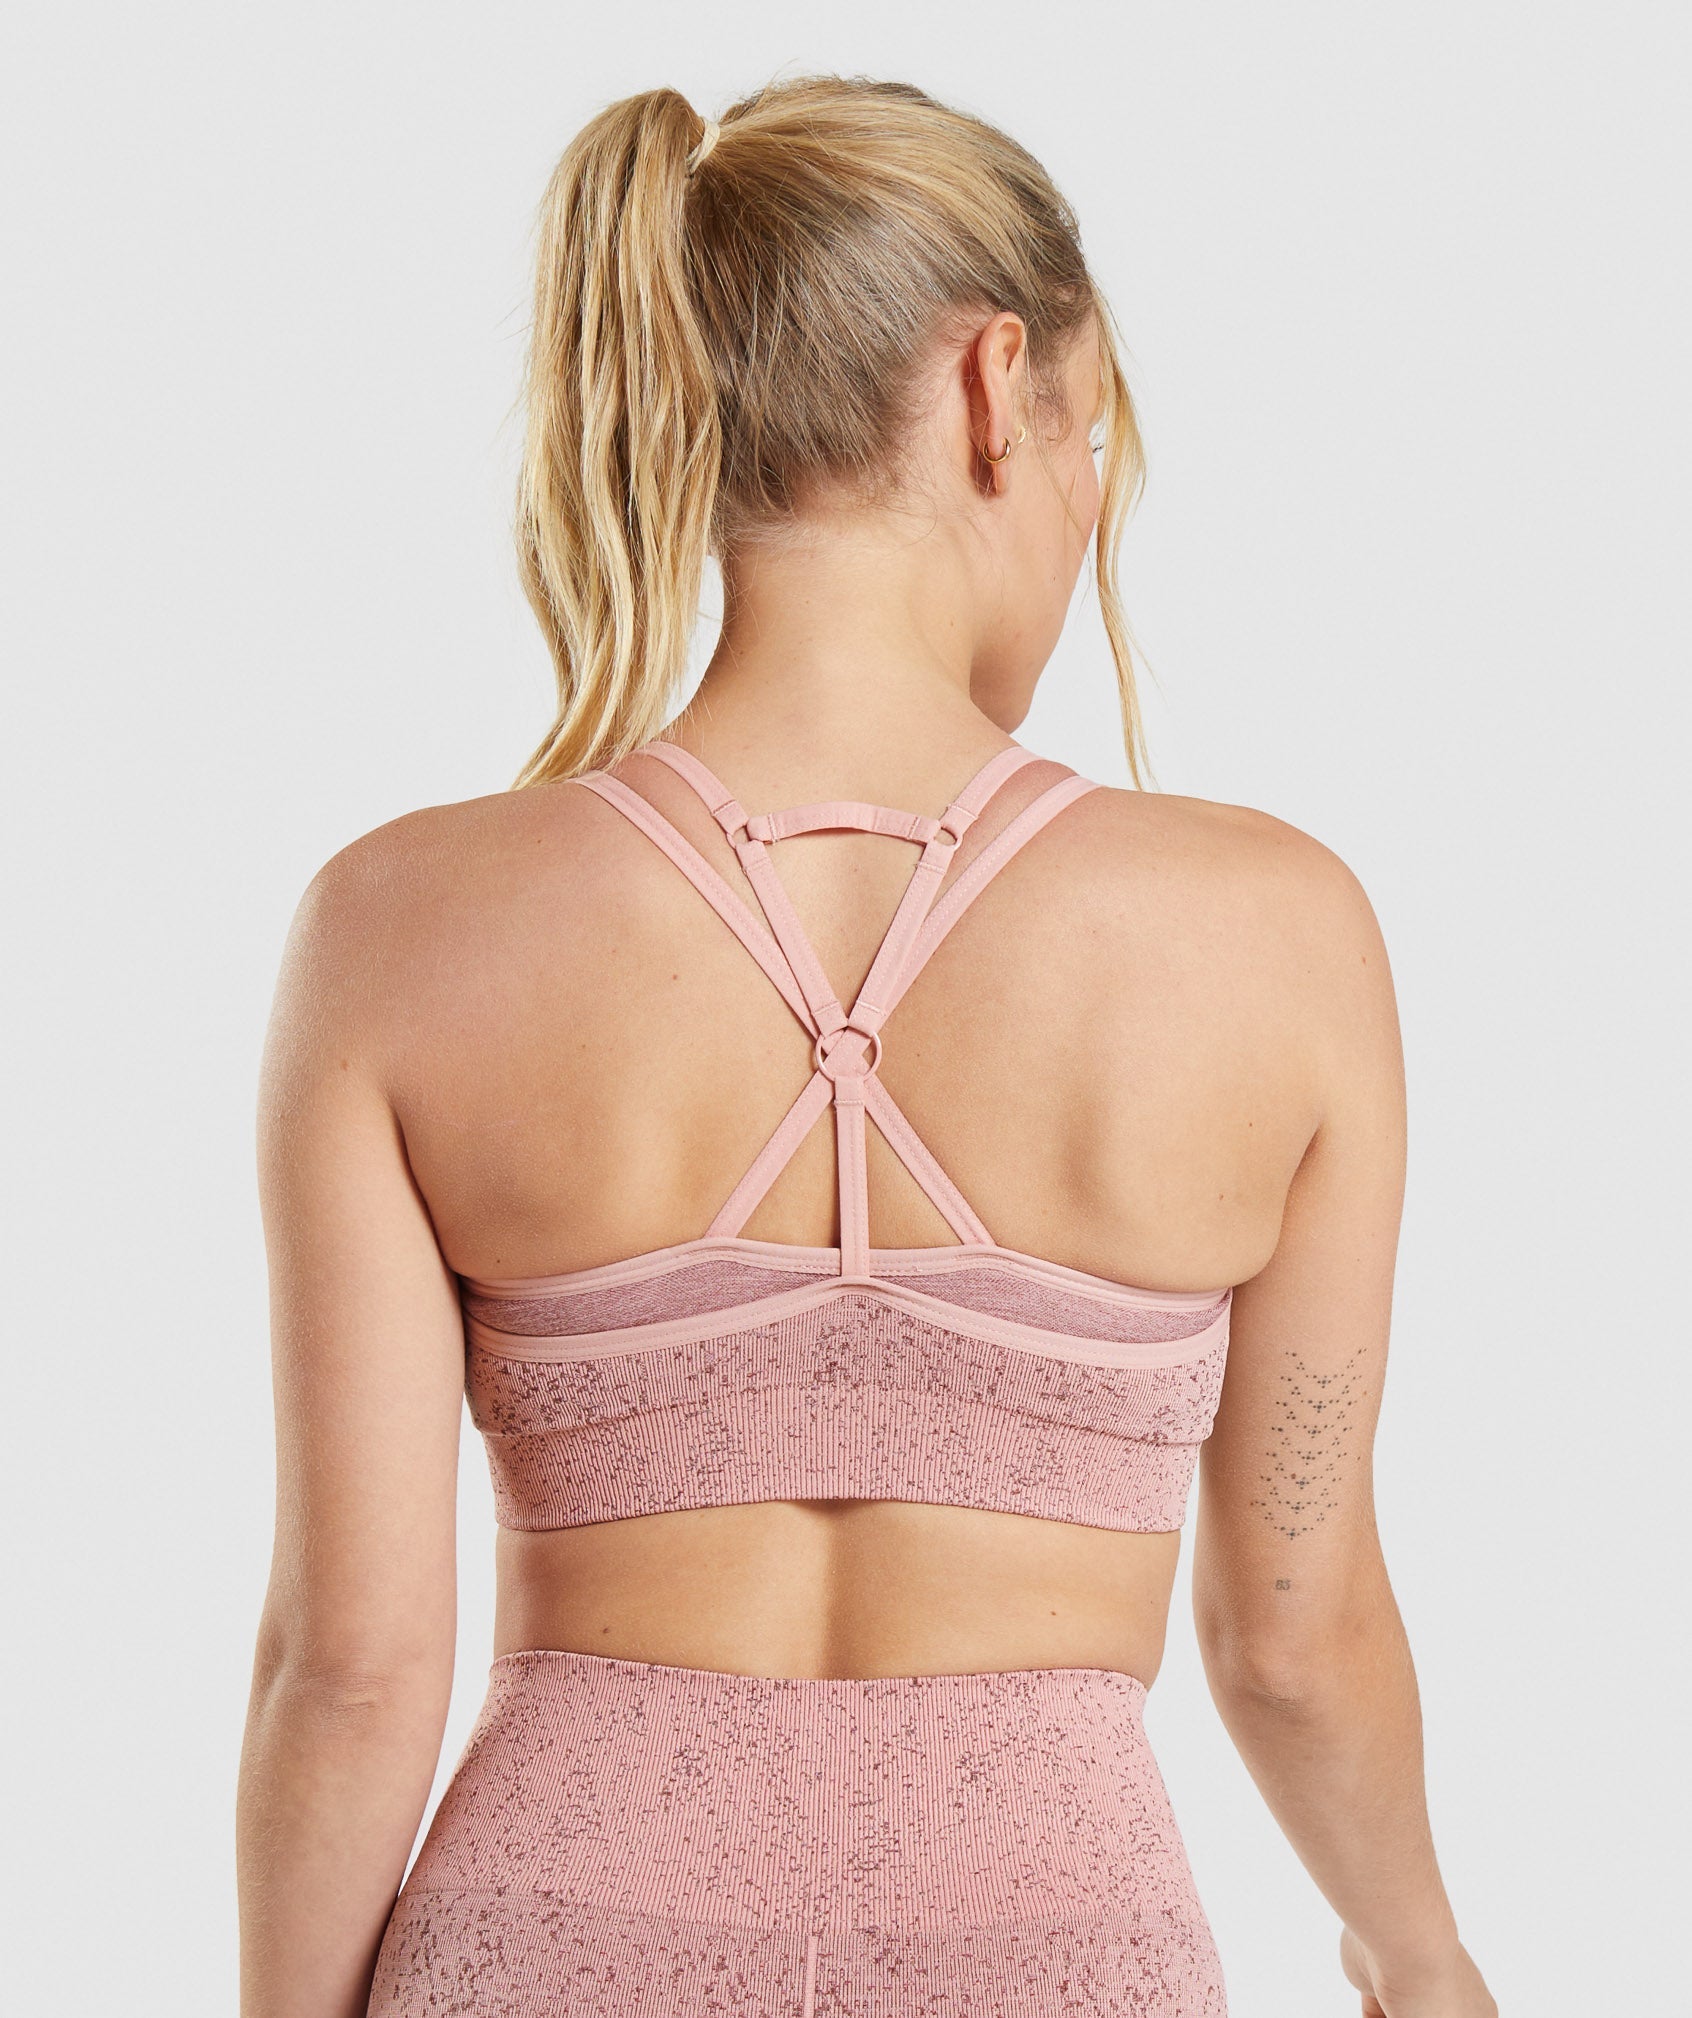 Gymshark ADAPT OMBRE SEAMLESS Padded SPORTS BRA Small Rose Pink/light Blue  - $22 (51% Off Retail) - From Amy